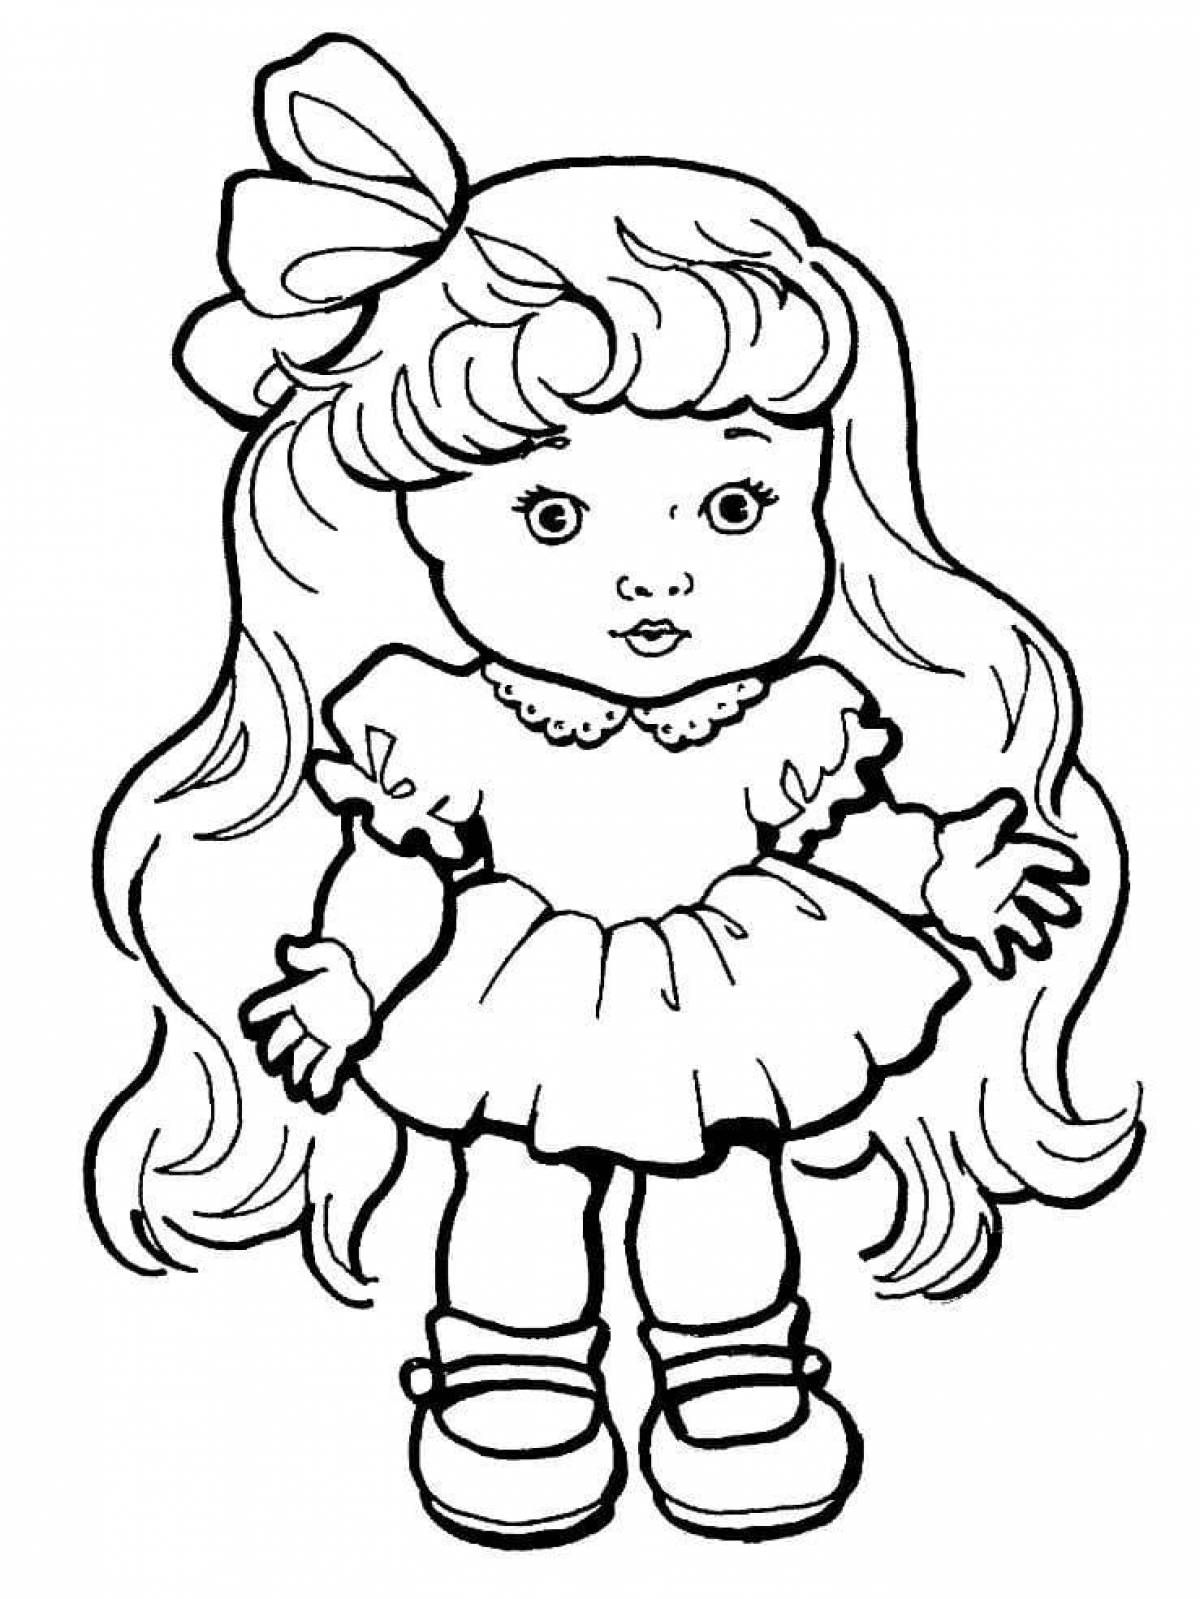 Coloring book funny doll